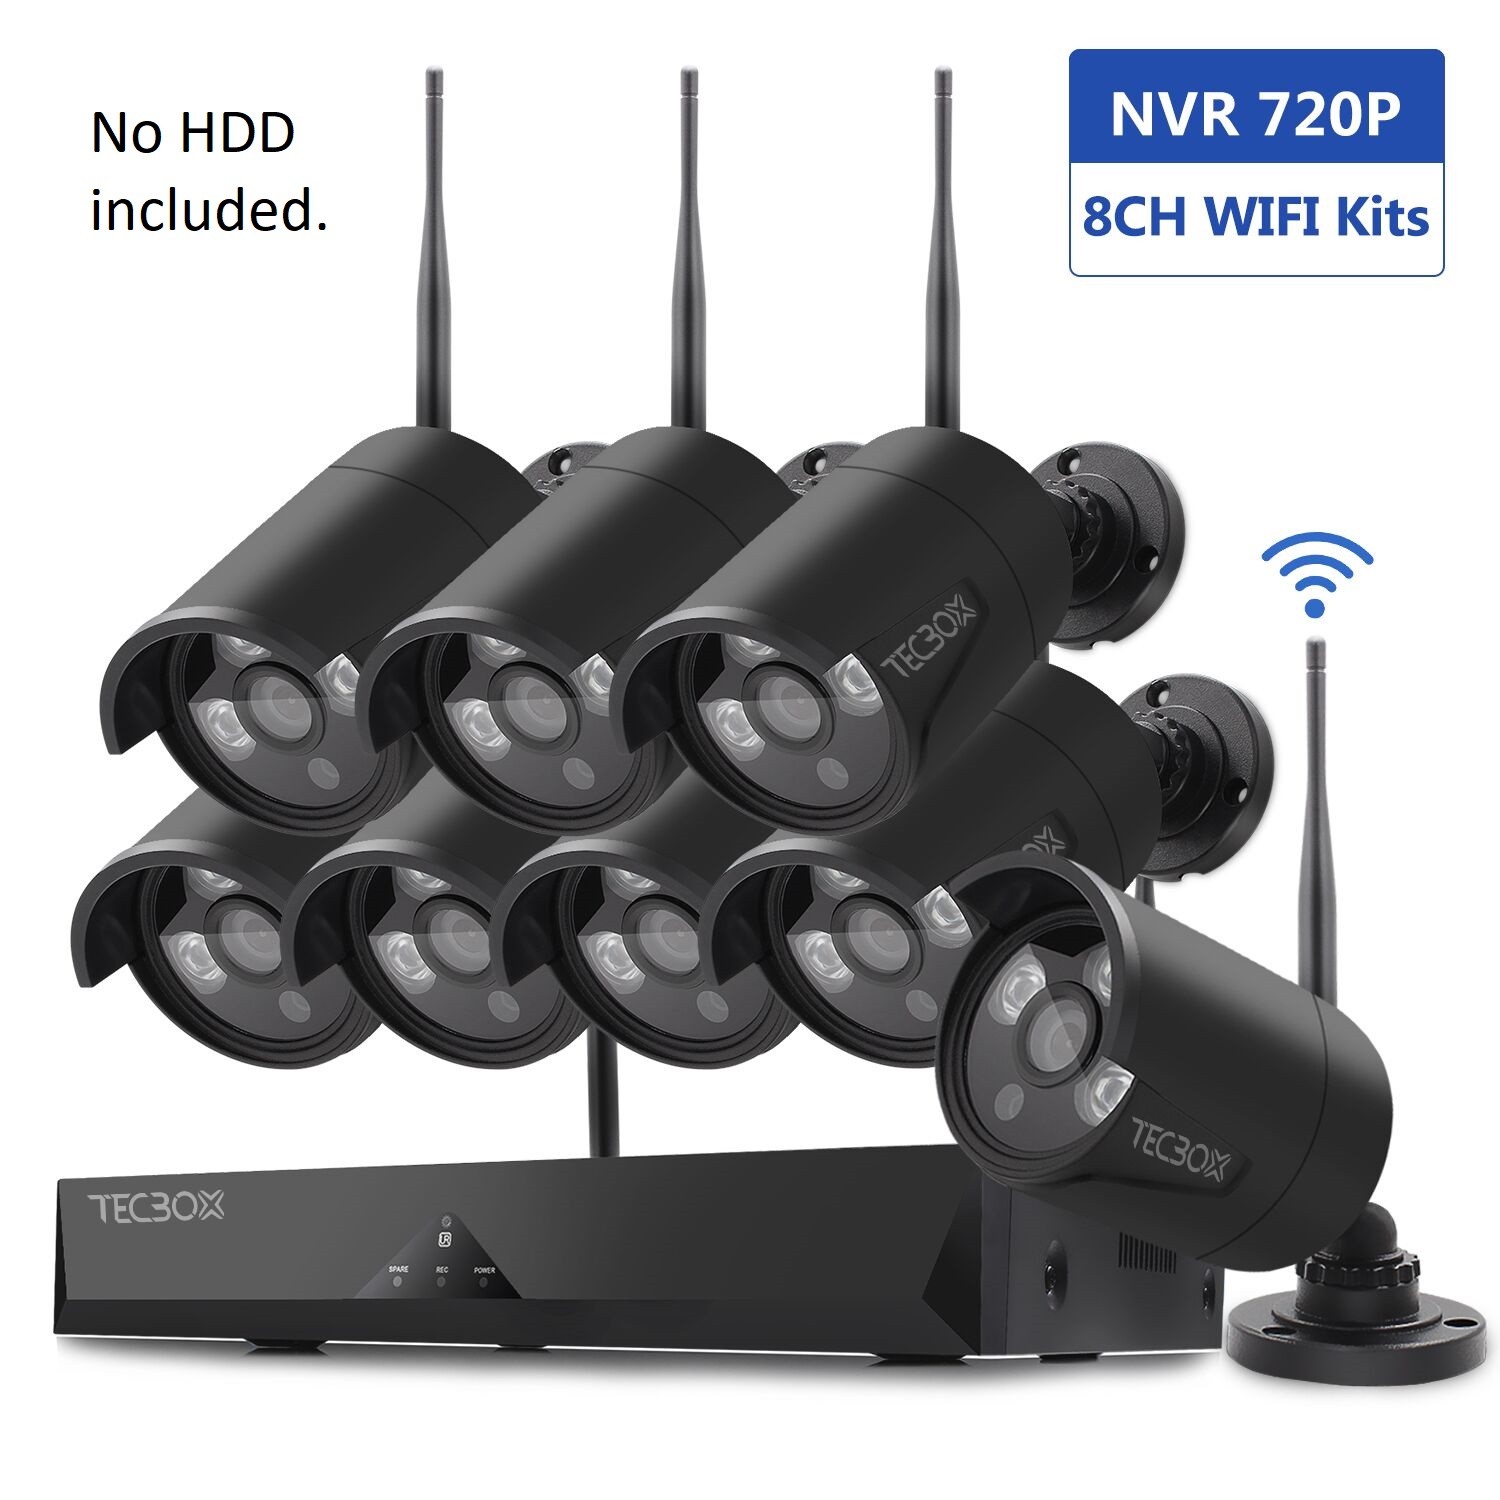 TECBOX 8-Ch NVR No Hard Drive Security Surveillance System with 8x 720p Cameras